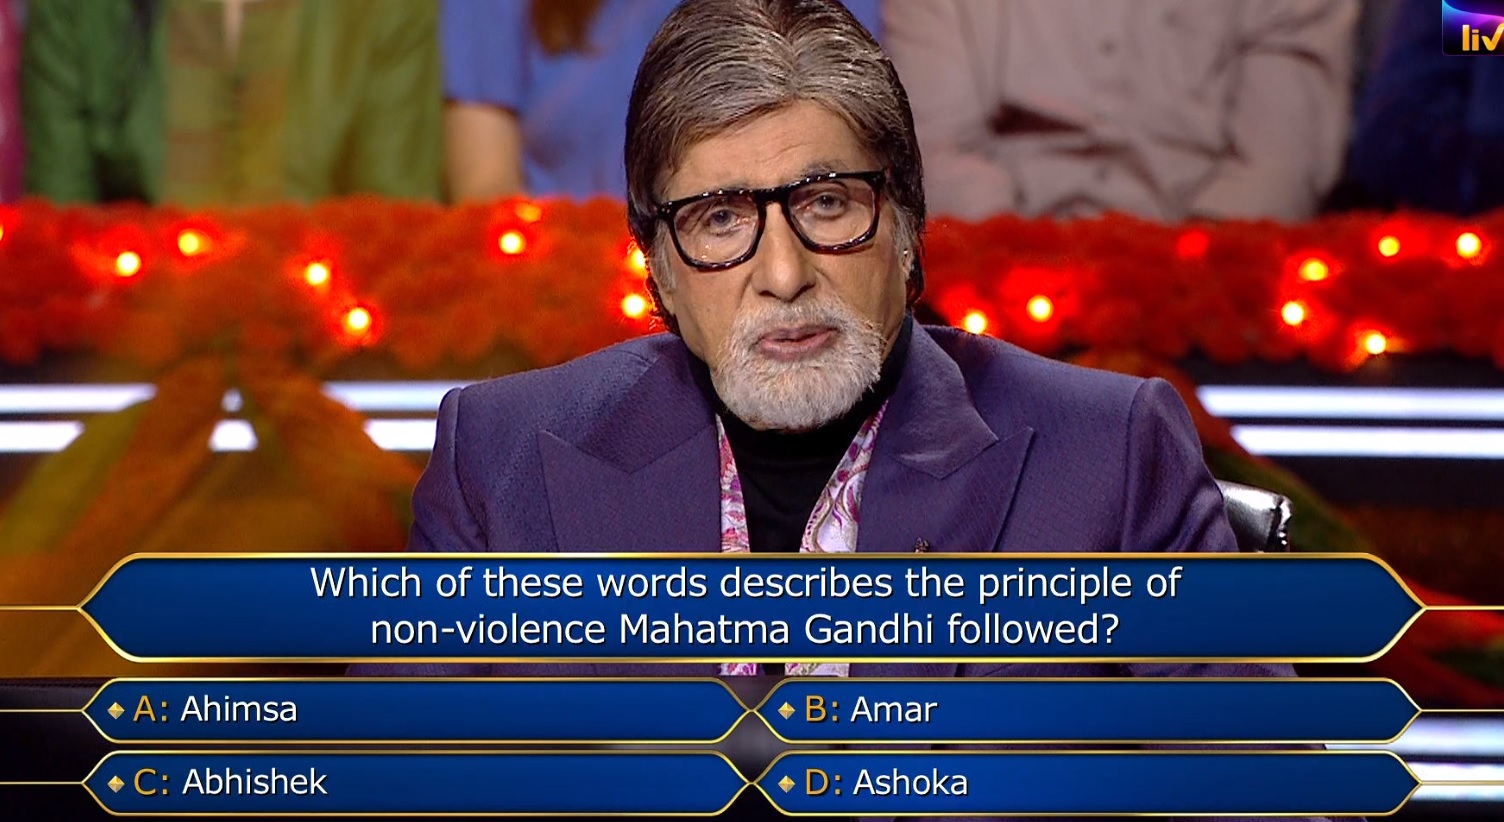 Ques : Which of these words describes the principle of non-violence Mahatma Gandhi followed?